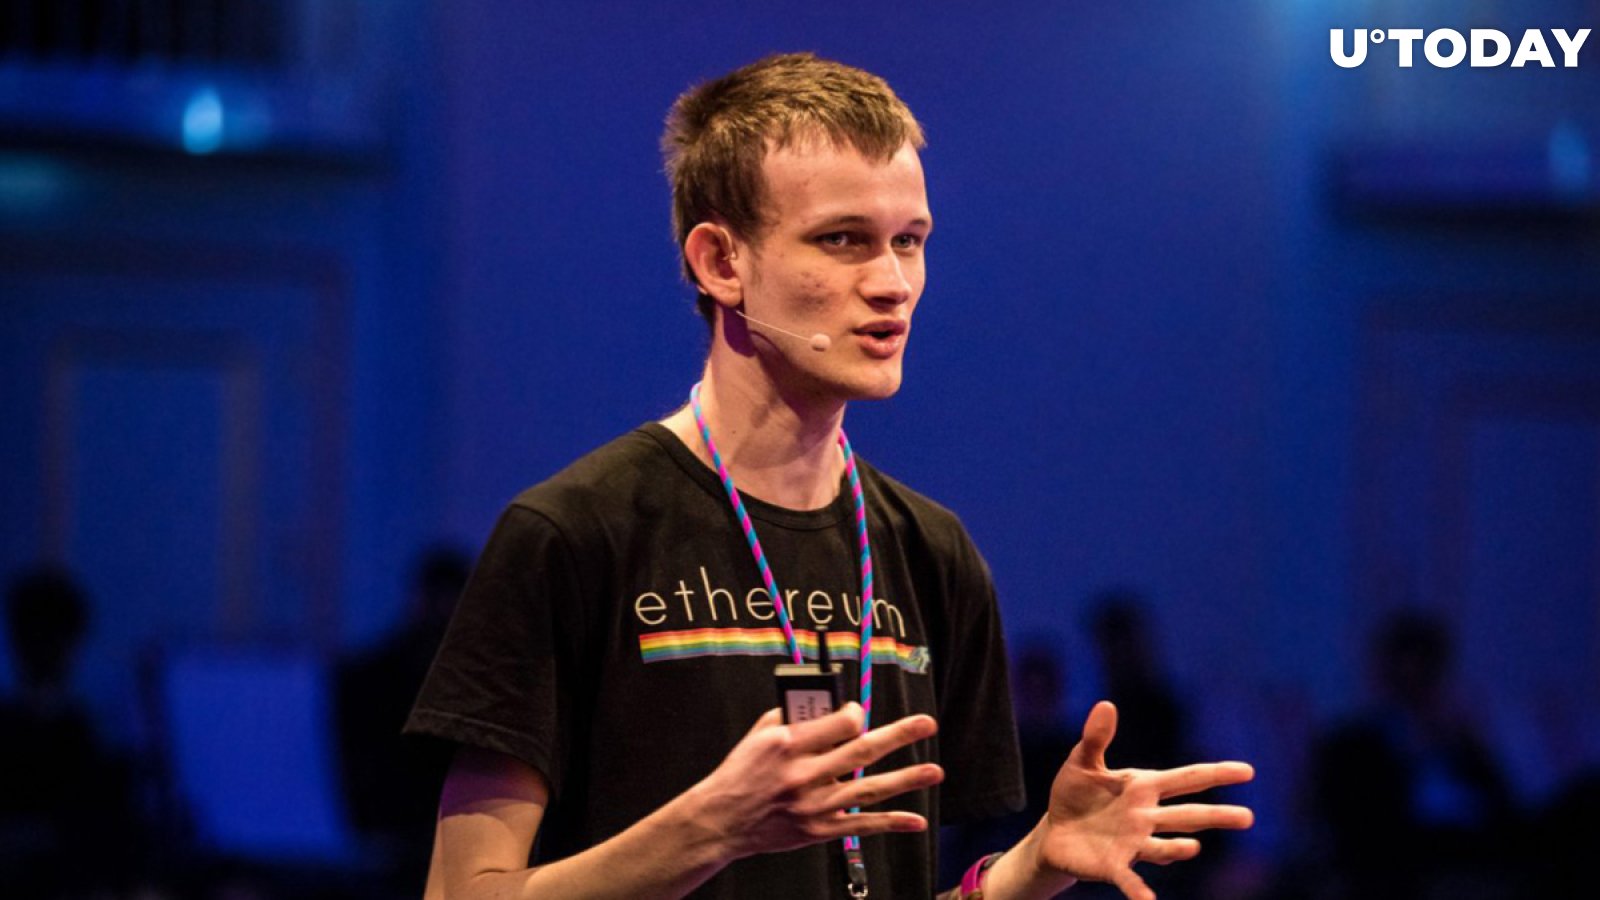 Revolution in Ethereum (ETH) Scalability: Vitalik Buterin Shares "All In" Roadmap With 100,000 Maximum TPS